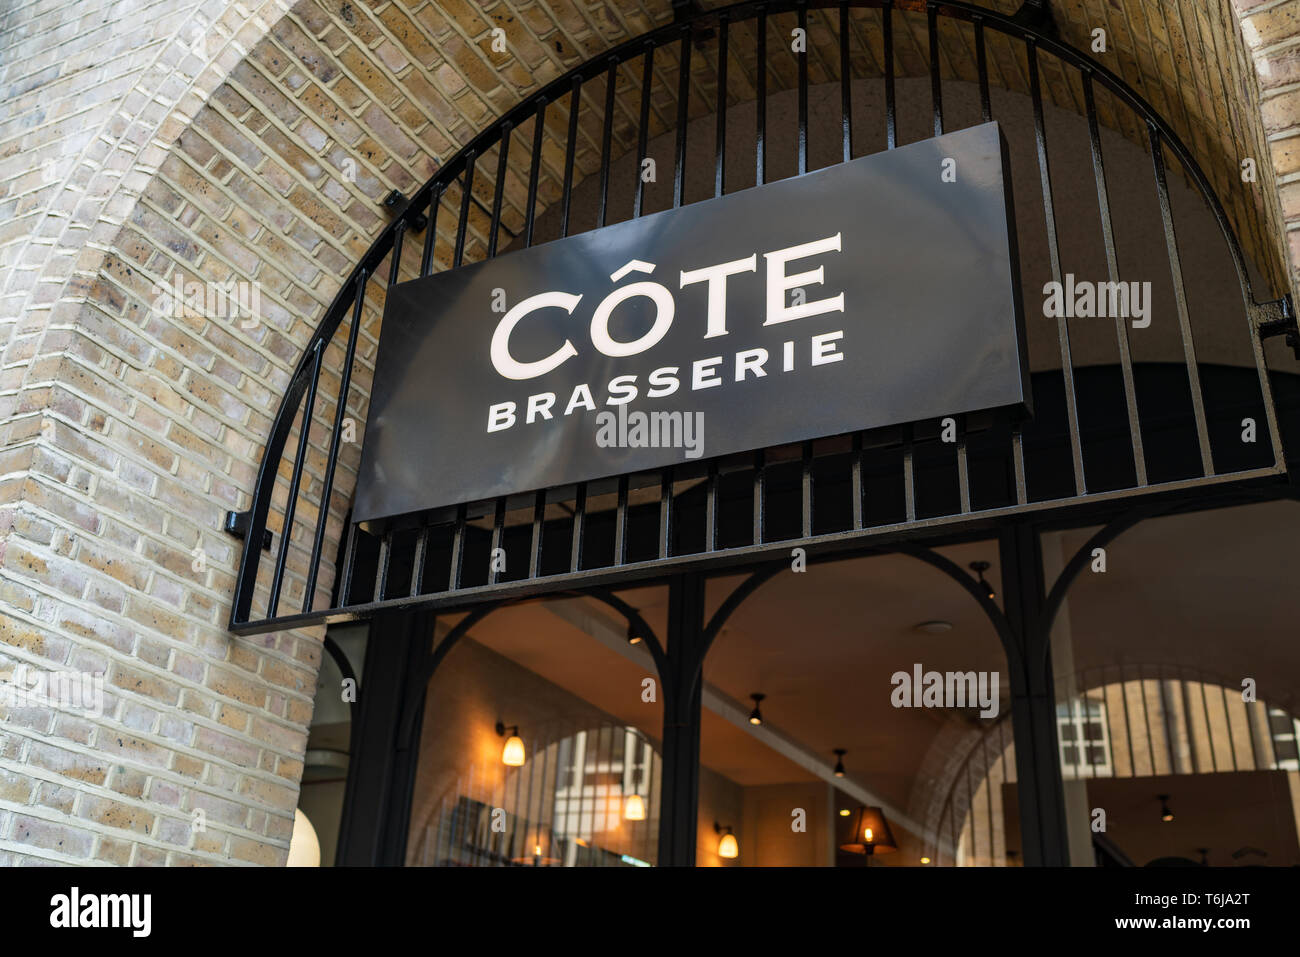 LONDON, UK - APRIL 1, 2019: A sign for a Cote Brasserie Restaurant in central London Stock Photo